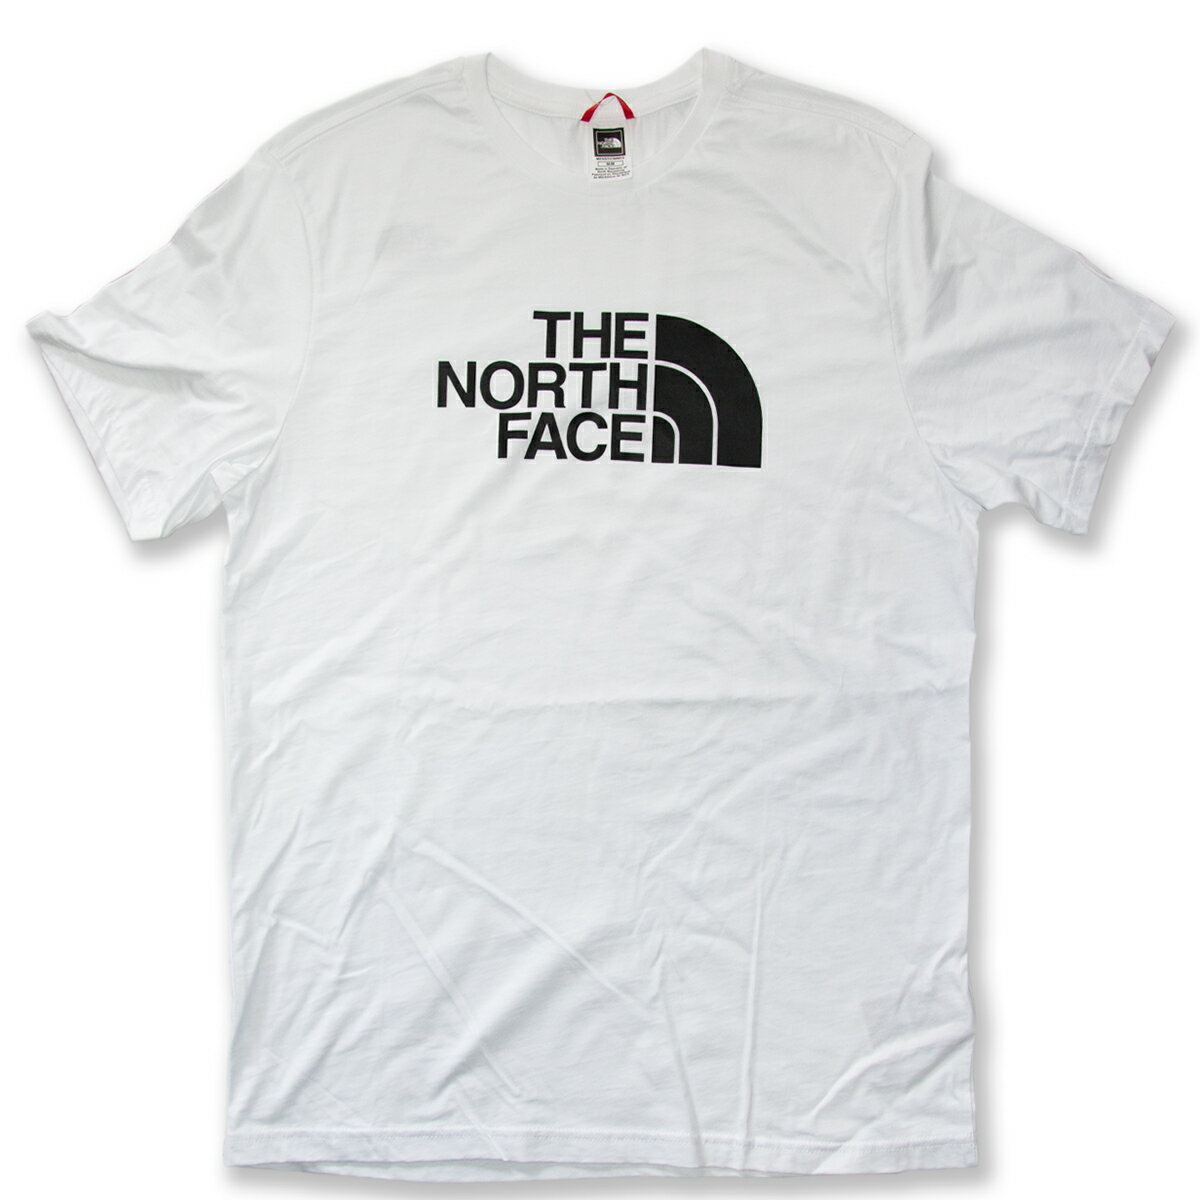 The North Face　Teeシャツ